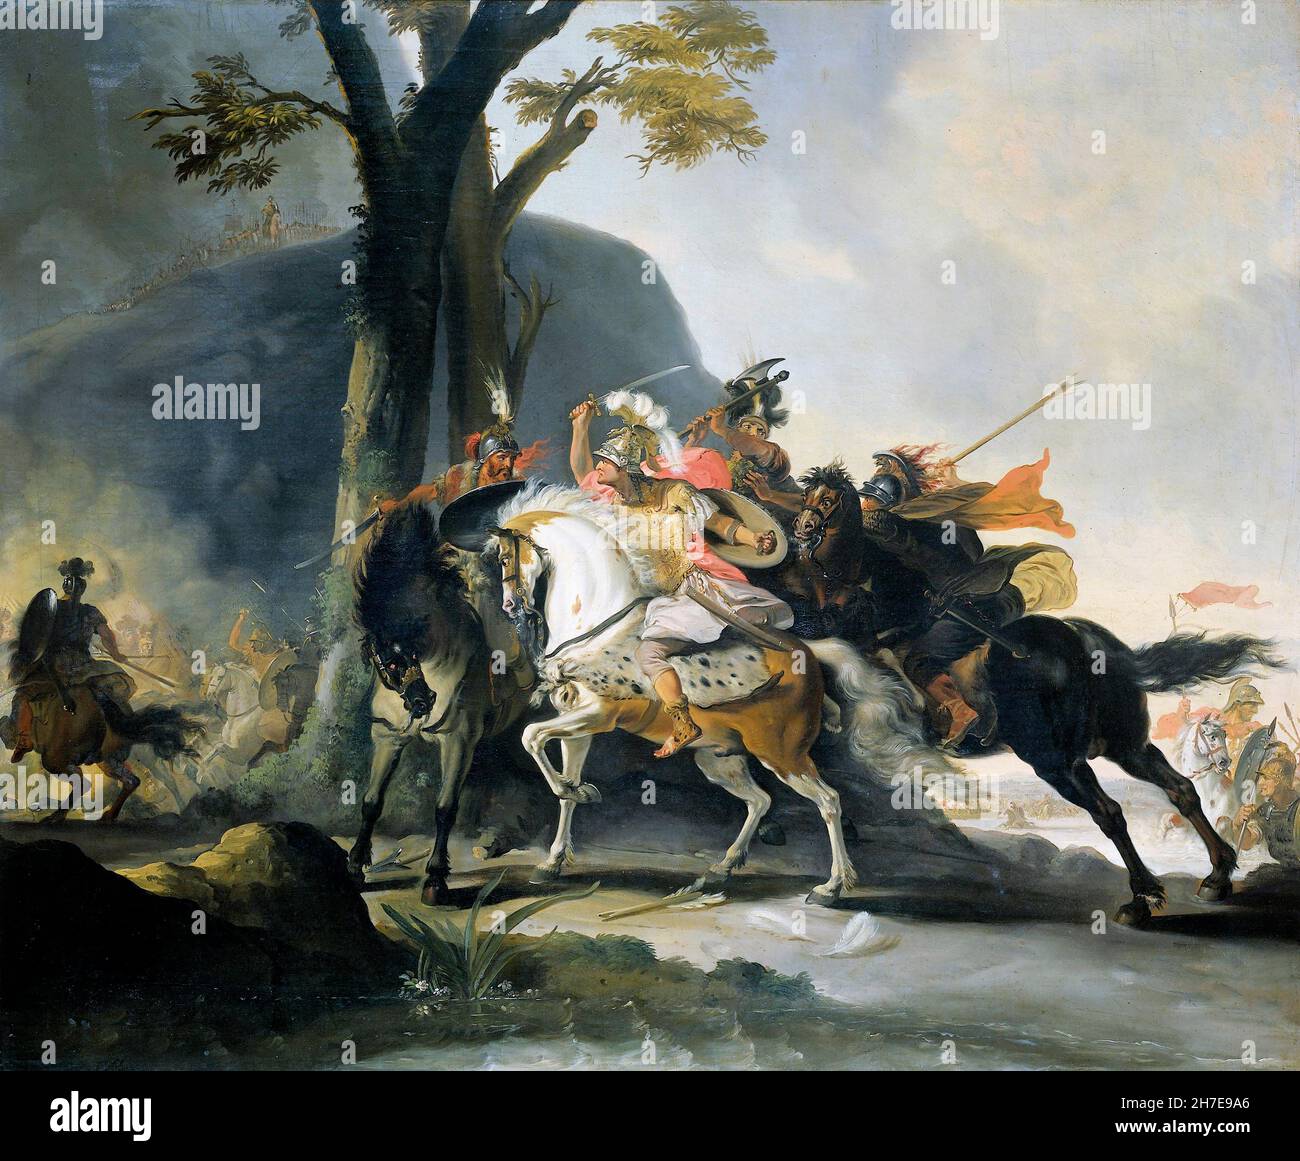 Alexander the Great at the Battle of the Granicus against the Persians by Cornelis Troost (1696-1750), oil on canvas, 1737 Stock Photo